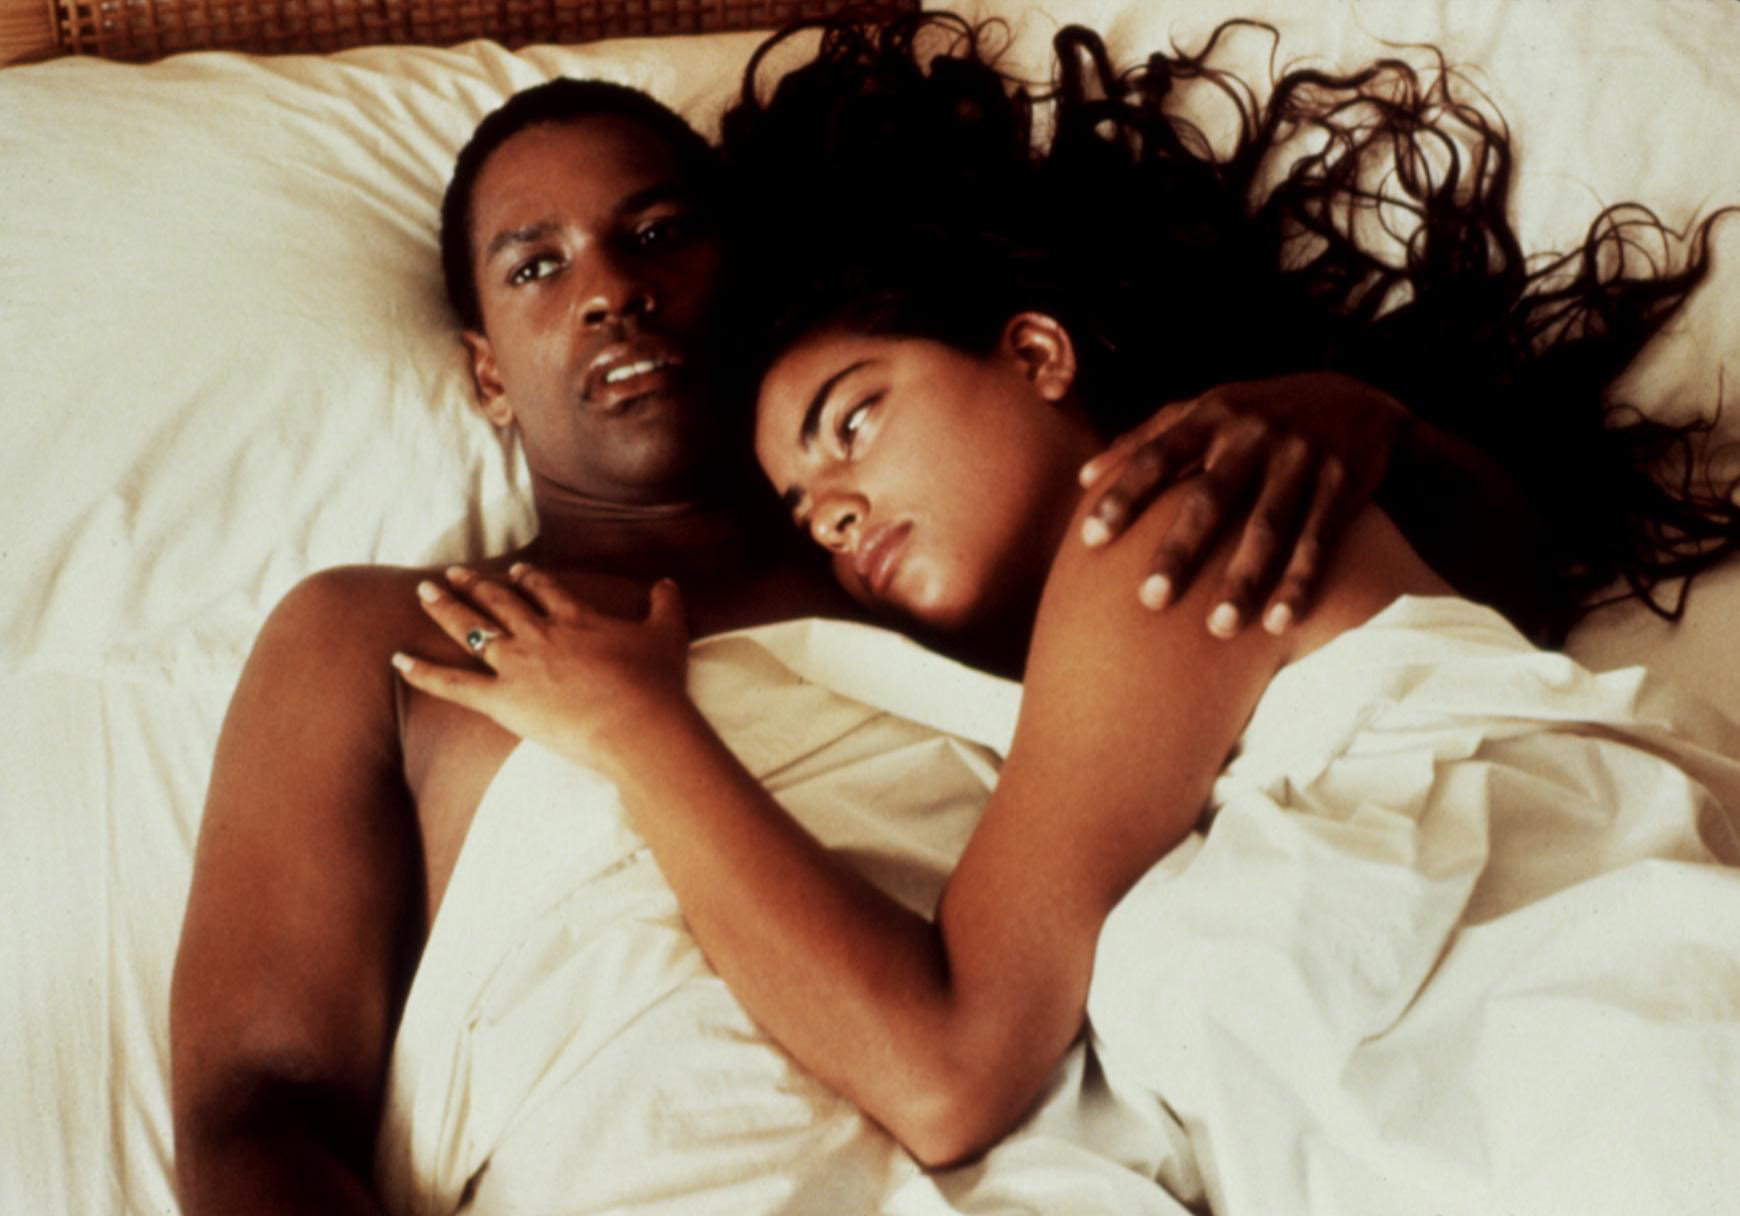 Denzel Washington and Sarita Choudhury in Mississippi Masala lying close together under a white sheet, appearing contemplative